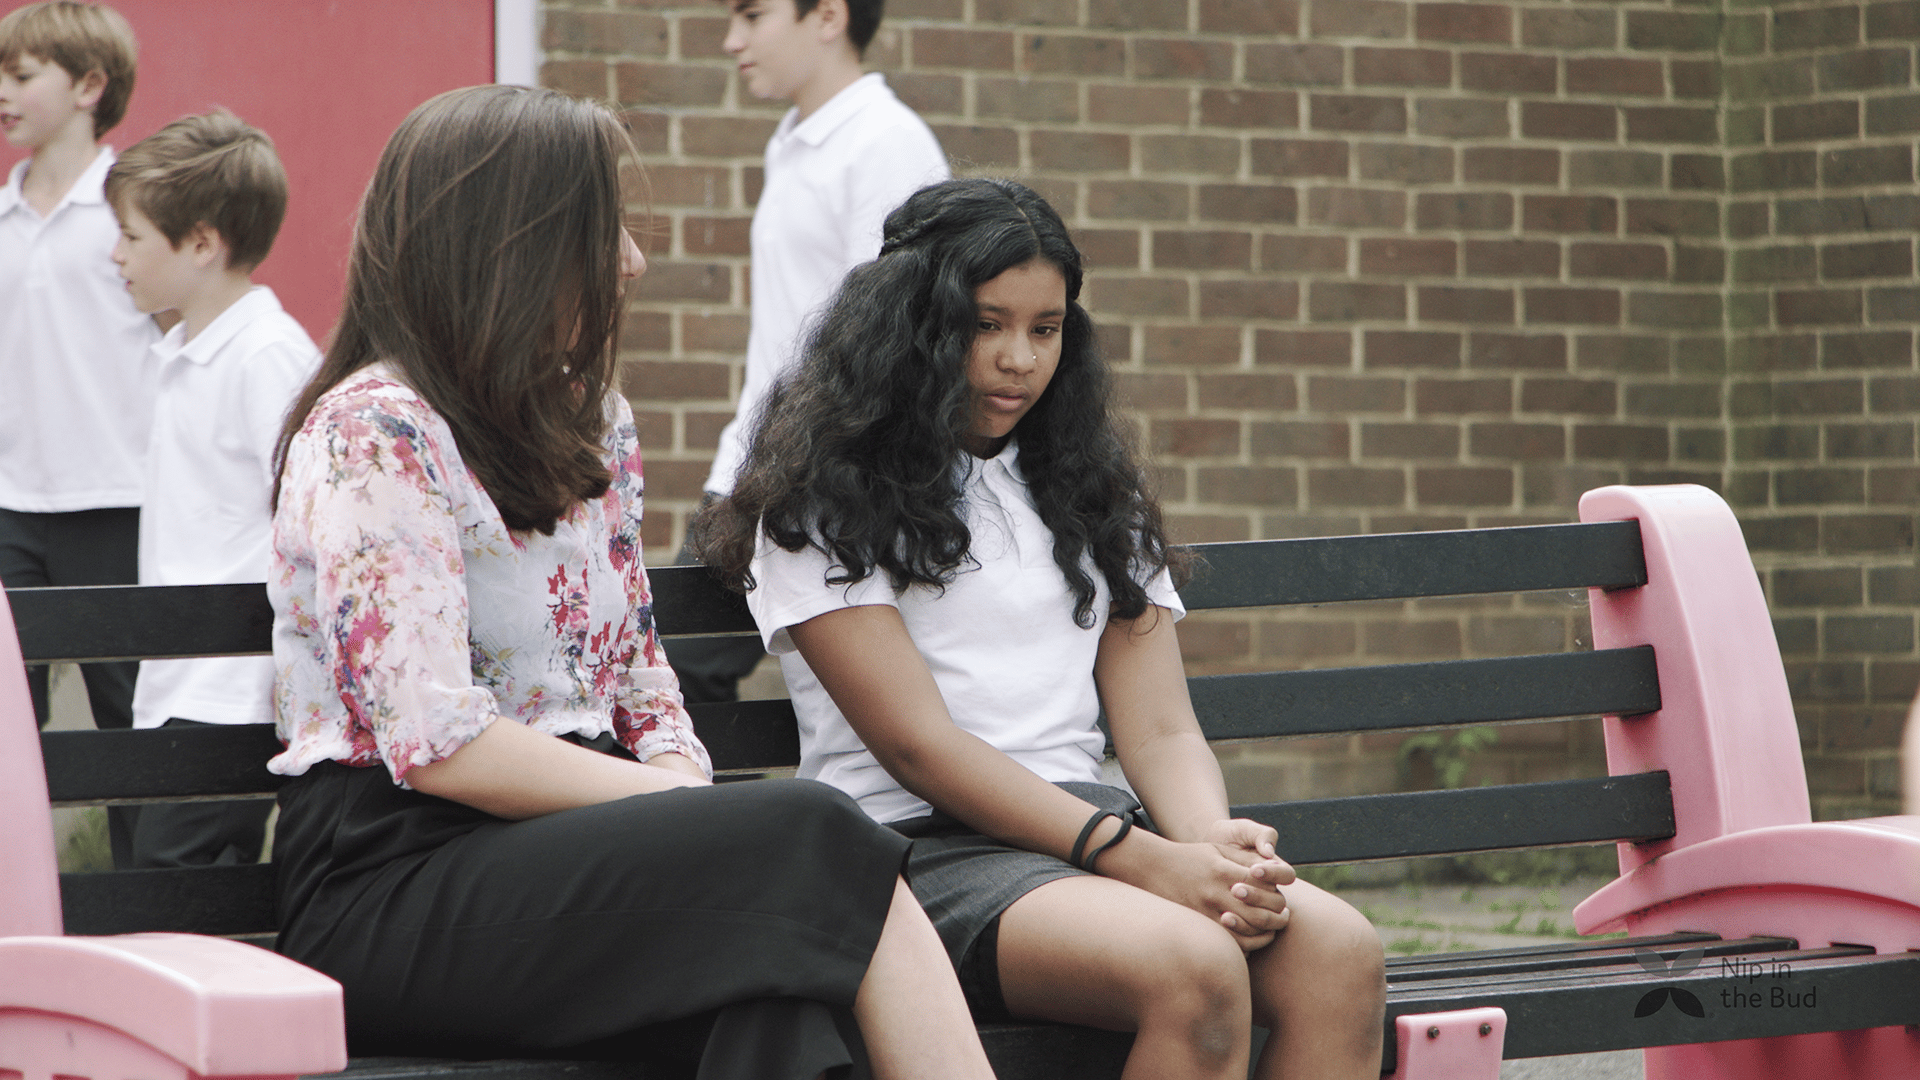 A teacher talks to a girl in the playground.